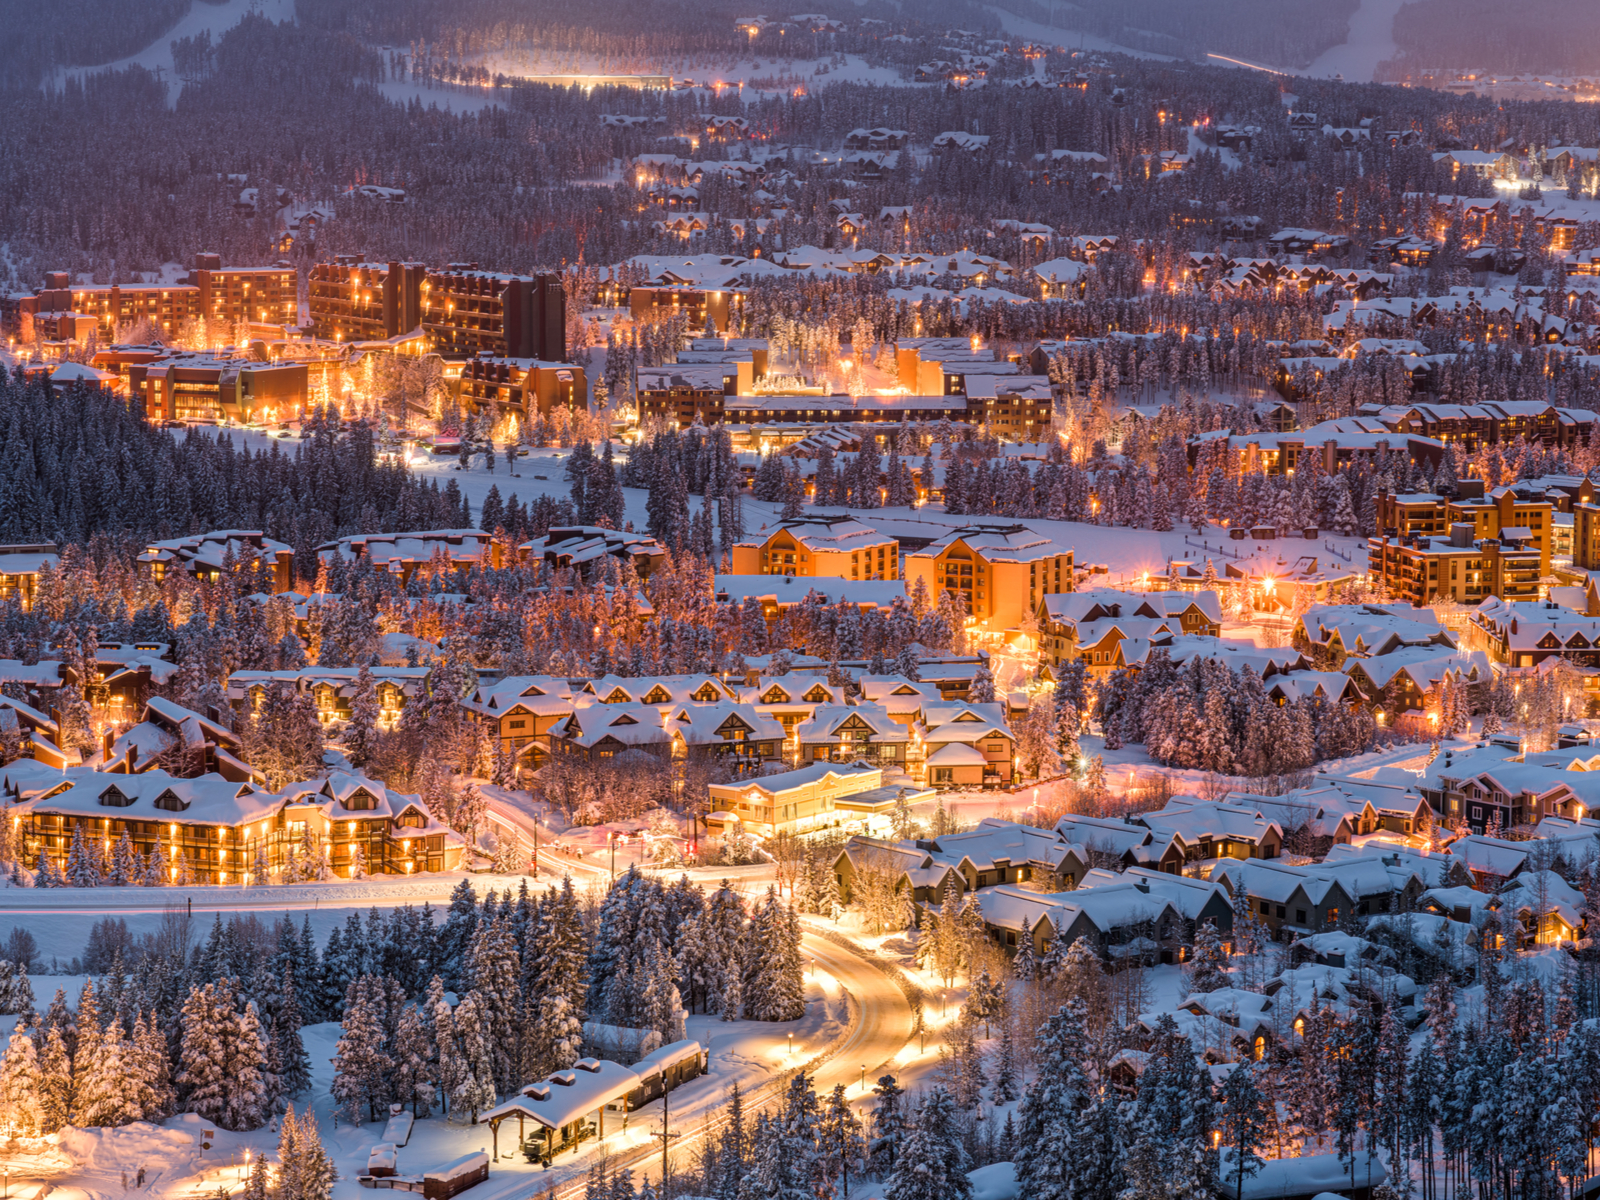 Illuminated town of Breckenridge during the cold winter night, one of the best ski resorts near Denver with the most affordable tickets and lovely lodging